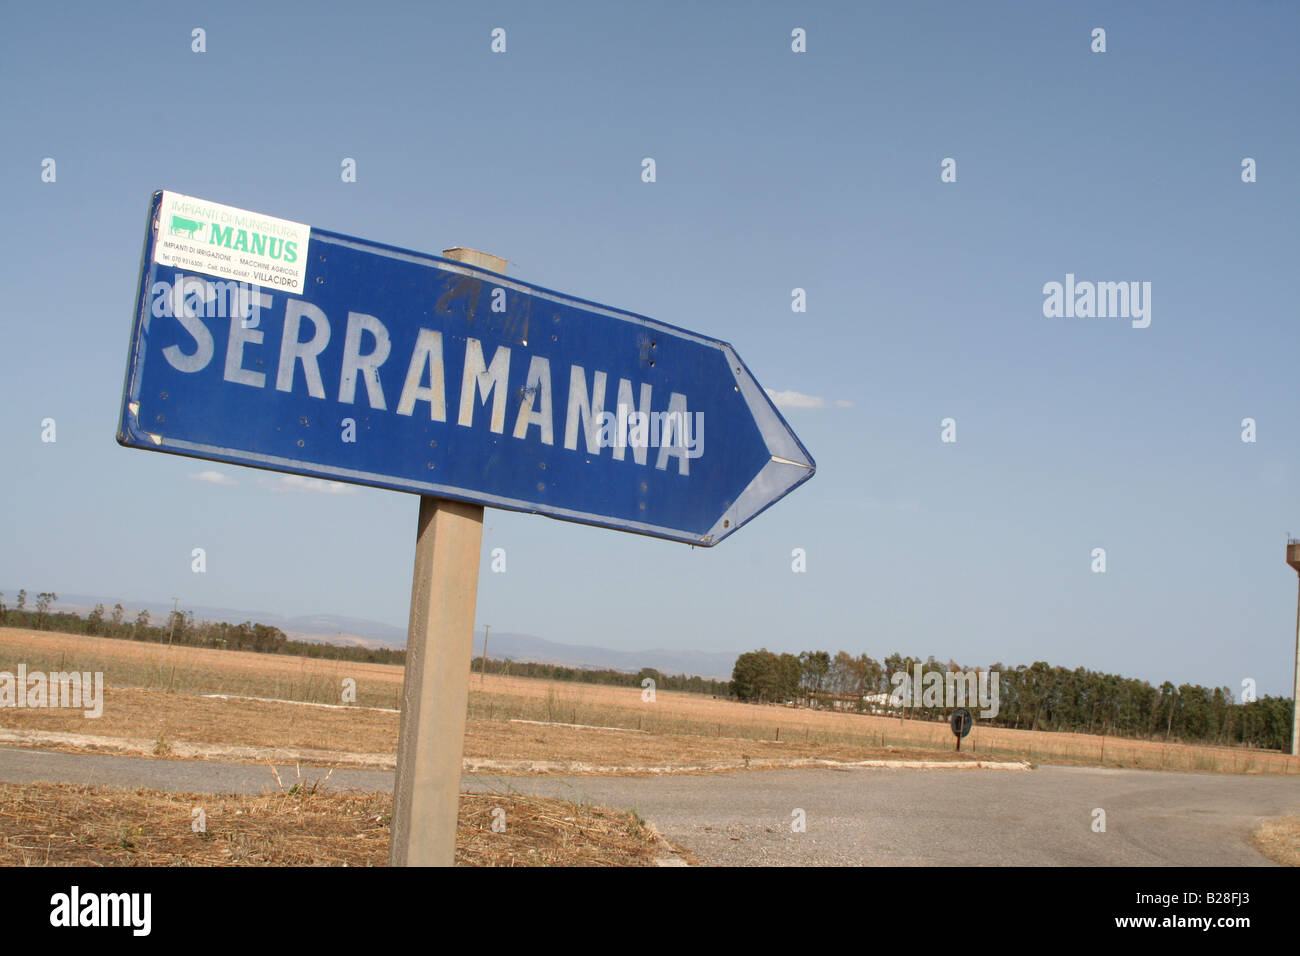 Road sign in the Campidano region of south west Sardinia, Italy Stock Photo